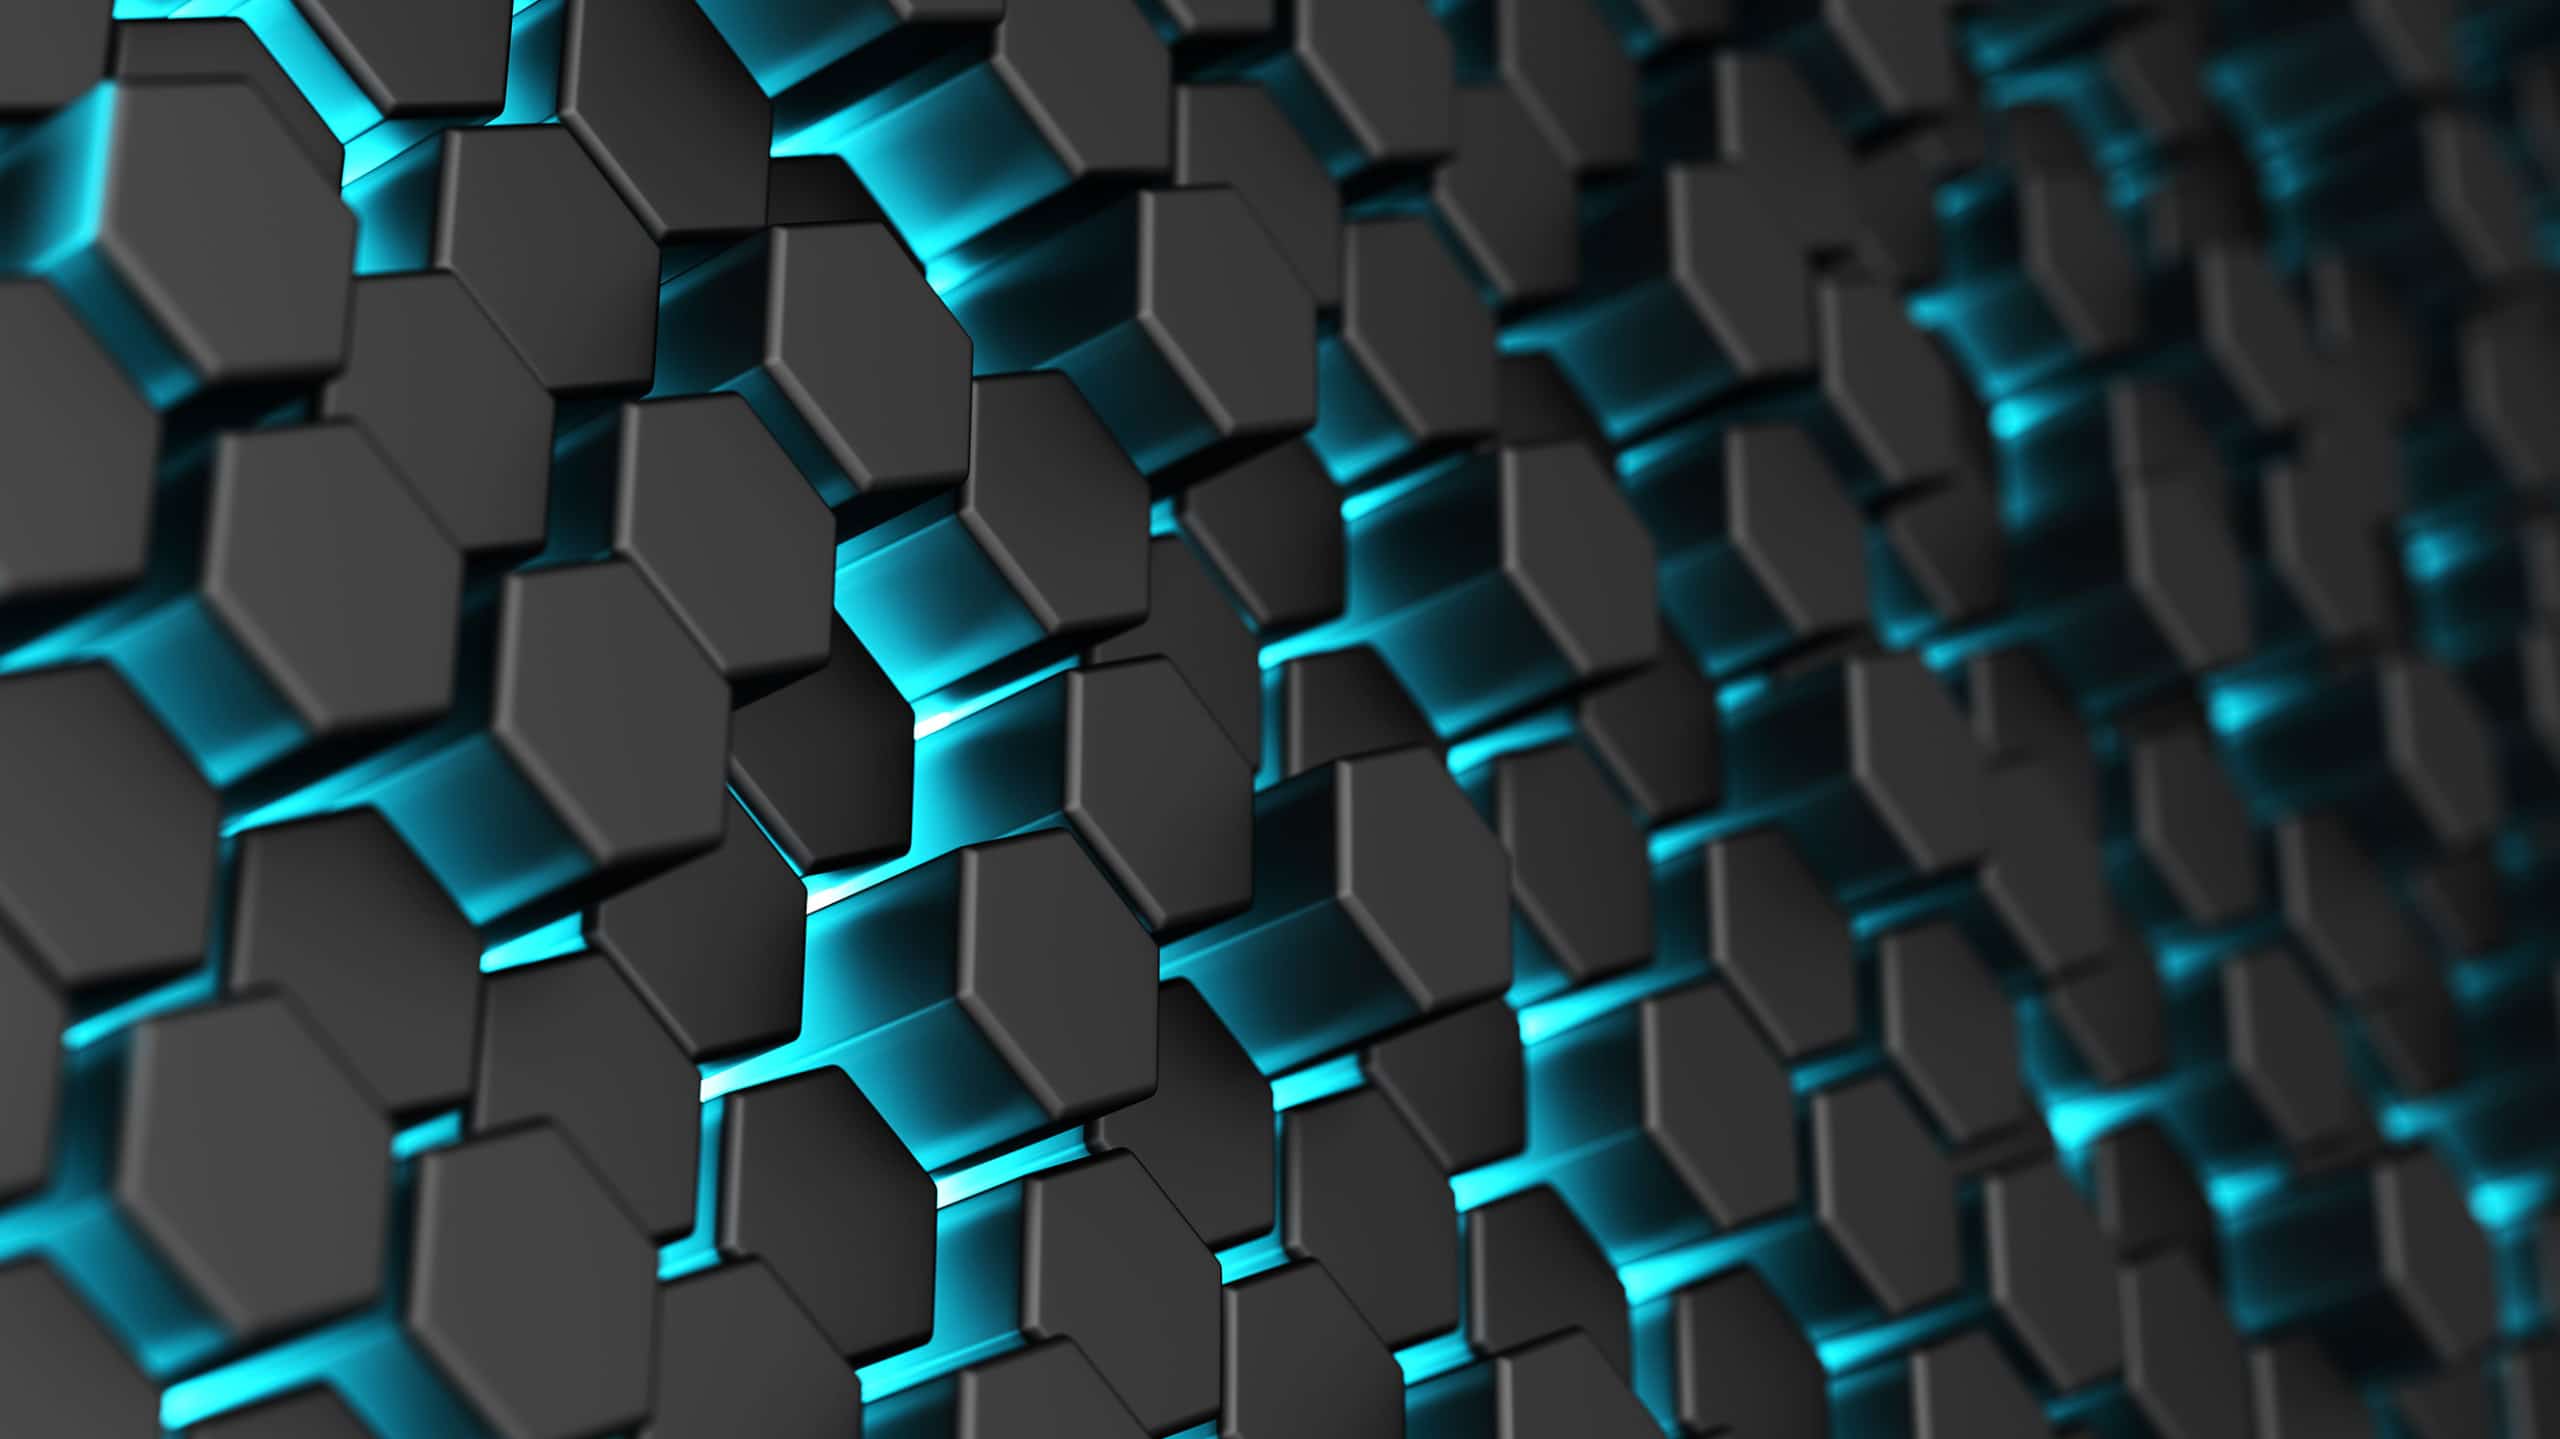 3D render of a pattern of black hexagonal tiles with neon blue light glowing from the edges, creating a futuristic effect. The focus blurs slightly towards the background, emblematic of Discord Malware